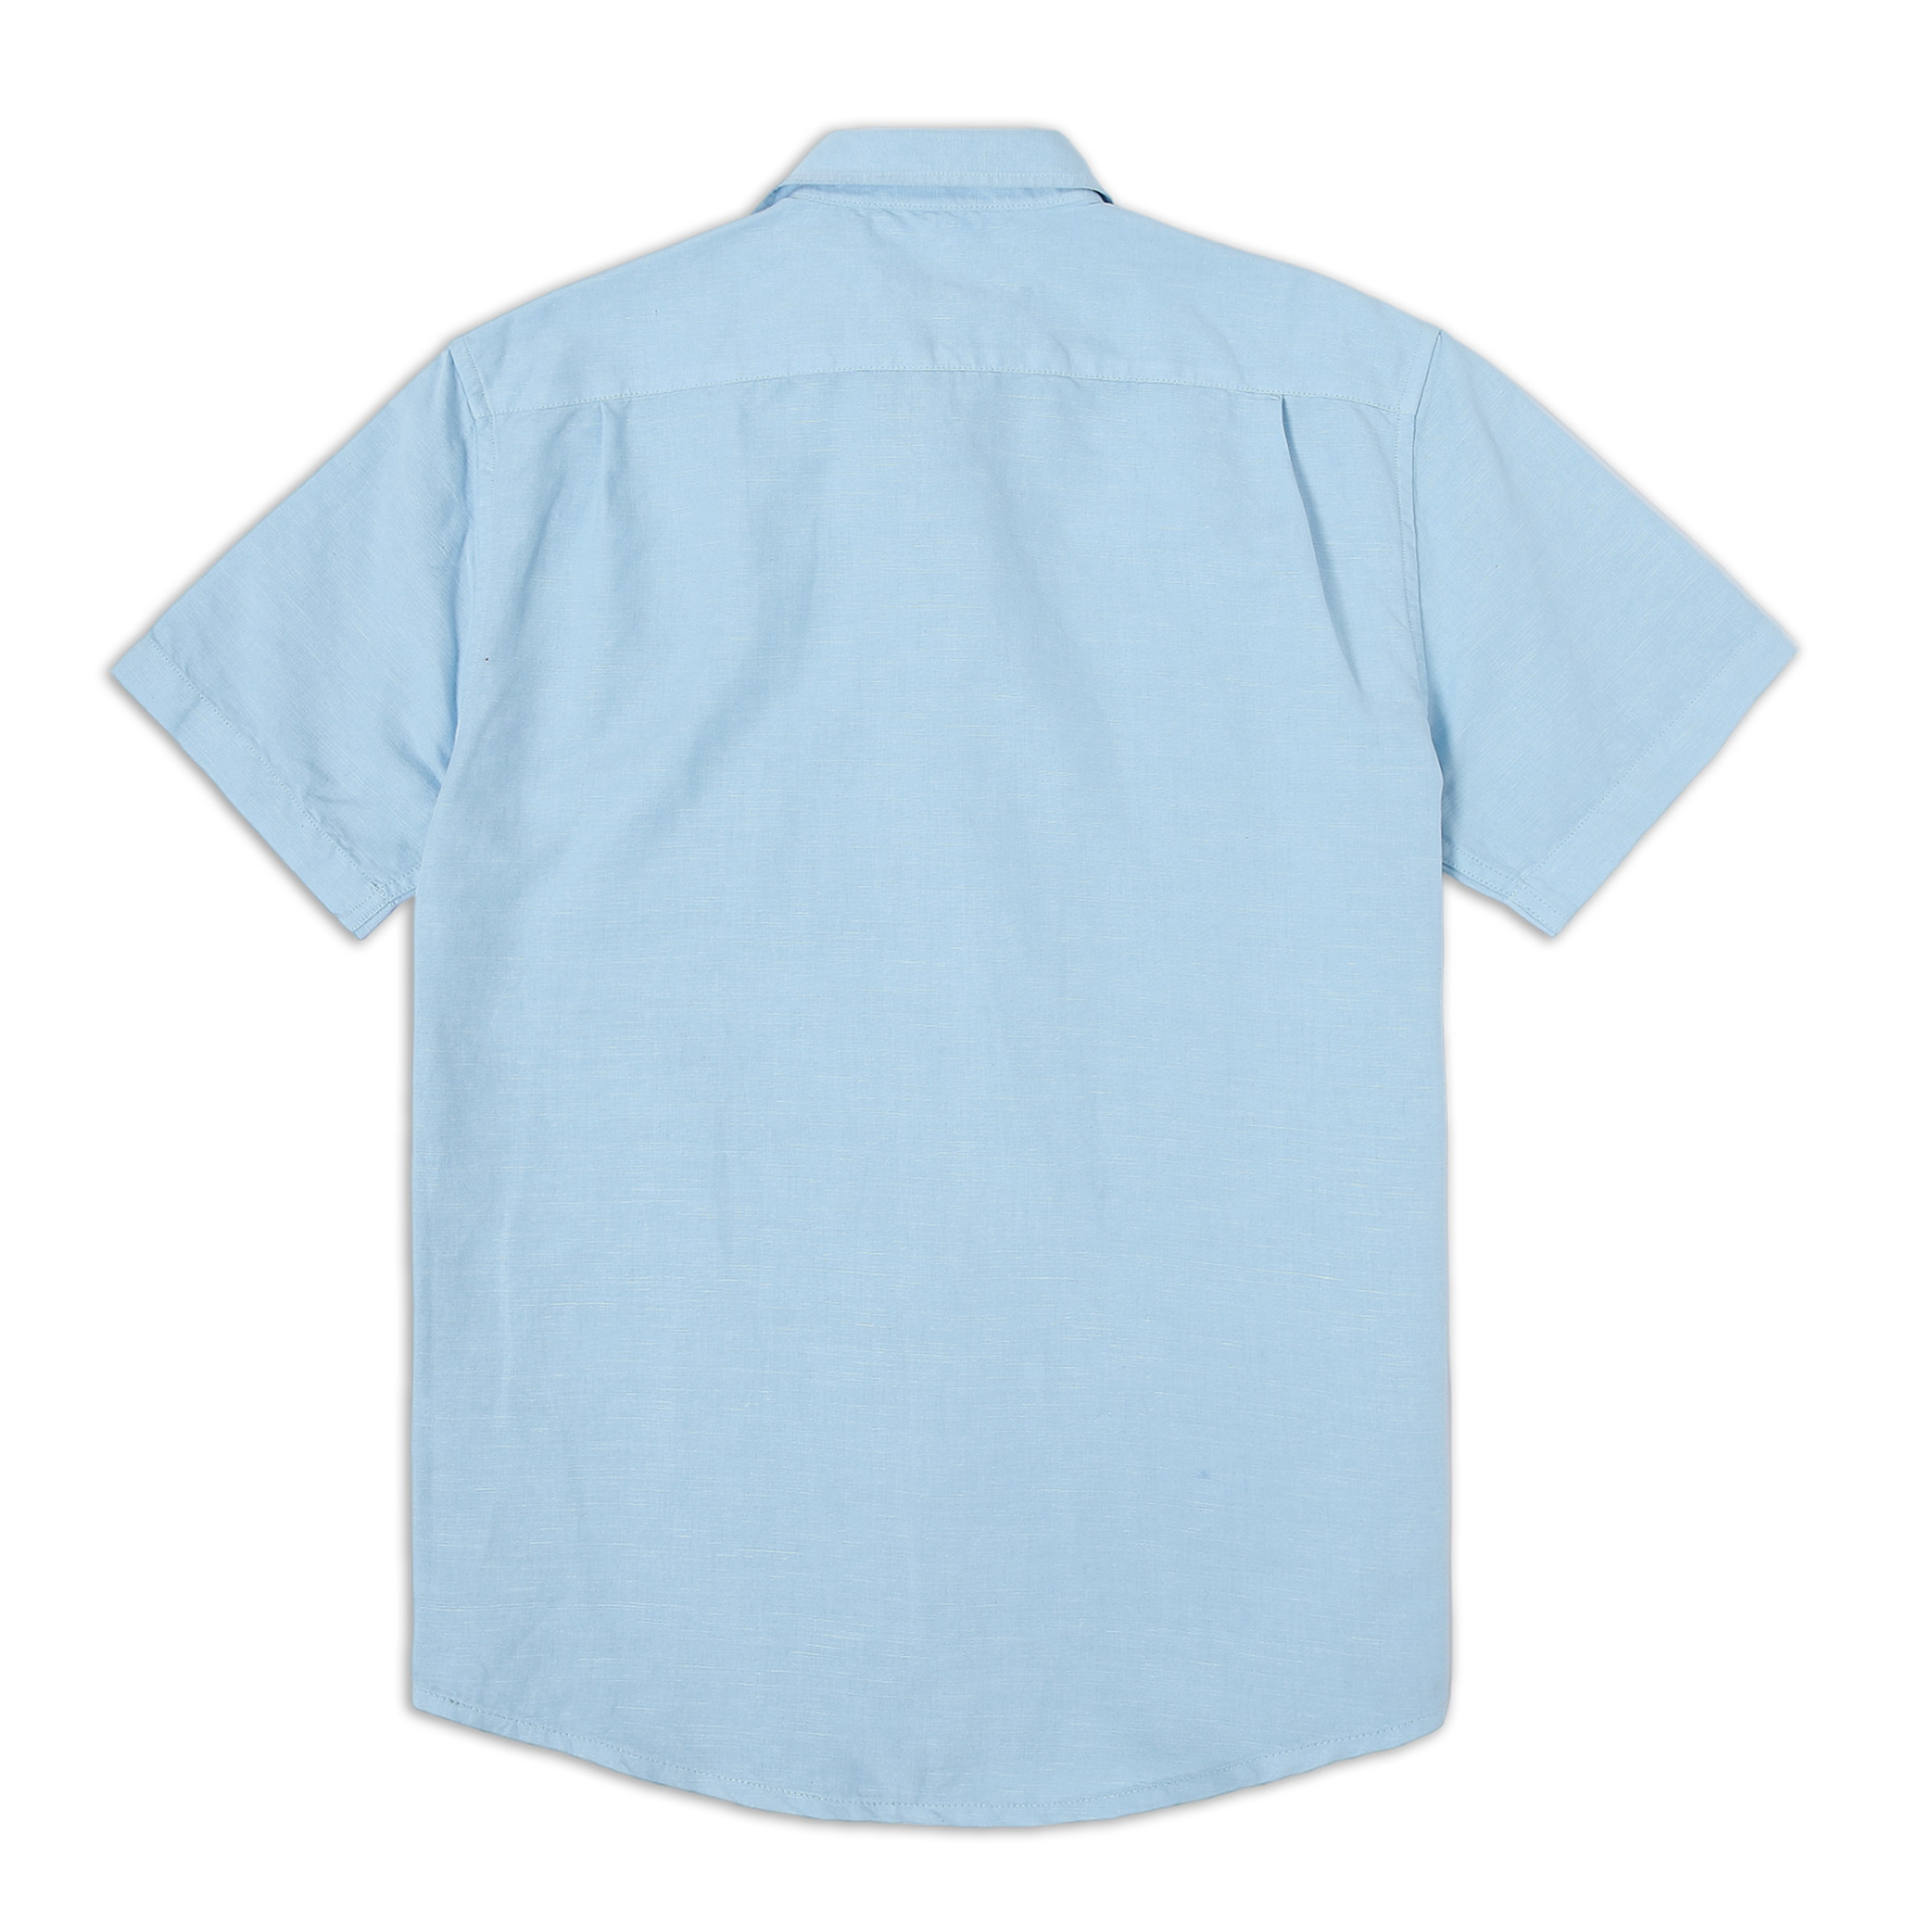 Retreat Linen Shirt Cool Blue back with short sleeves and collar